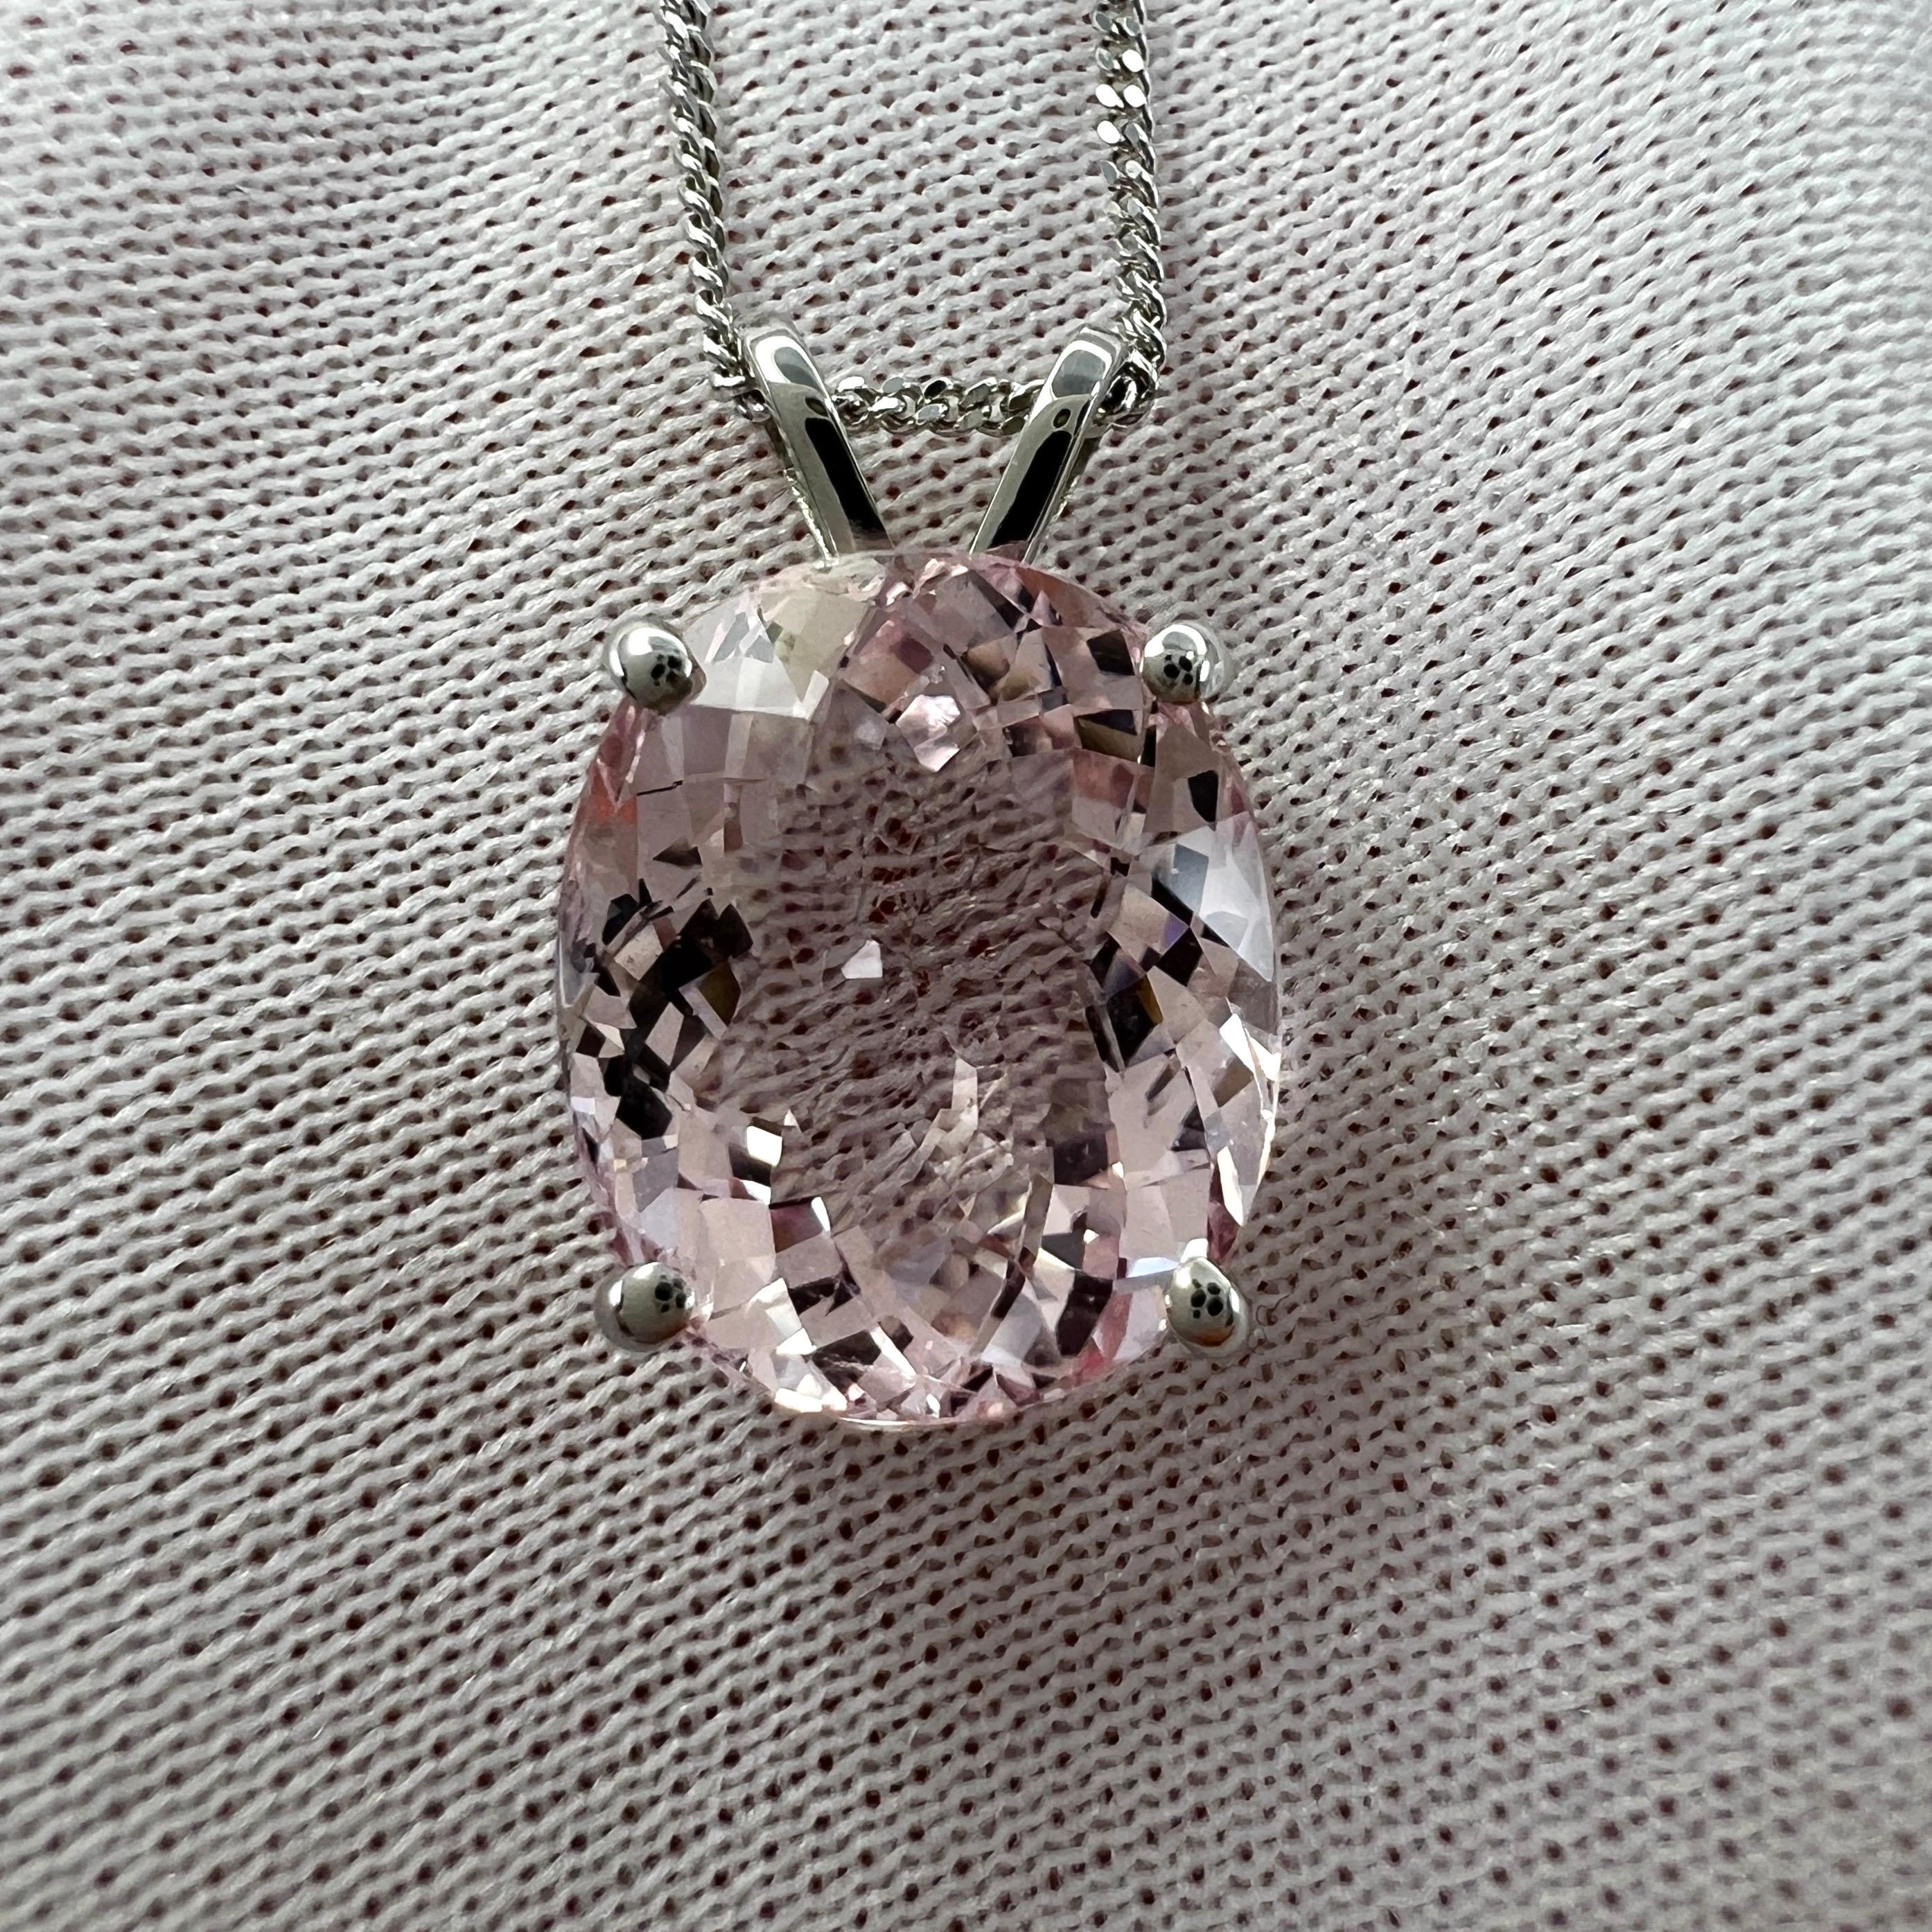 Fine Natural Oval Cut Pink Morganite 18k White Gold Solitaire Pendant Necklace.

Beautiful 4.50 carat light pink morganite set in a fine 18k white gold solitaire pendant.
Stunning morganite with a beautiful bright pink colour and excellent clarity.